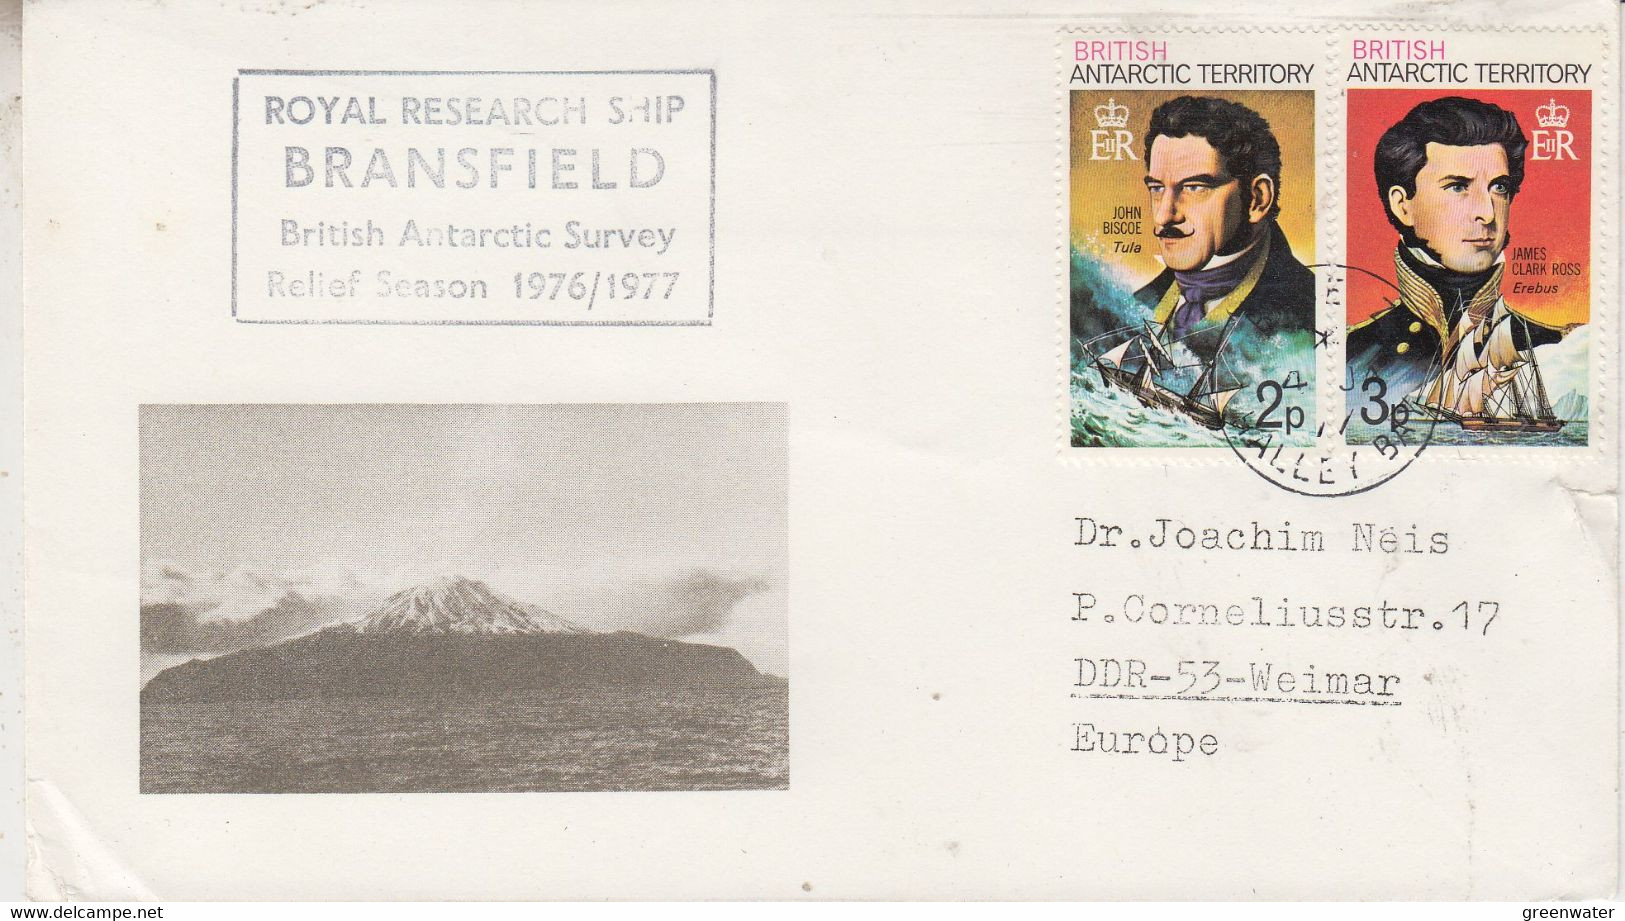 British Antarctic Territory (BAT) Cover RRS Bransfield Ca Base Z Halley Bay 4 JA 1977 (TA183) - Lettres & Documents